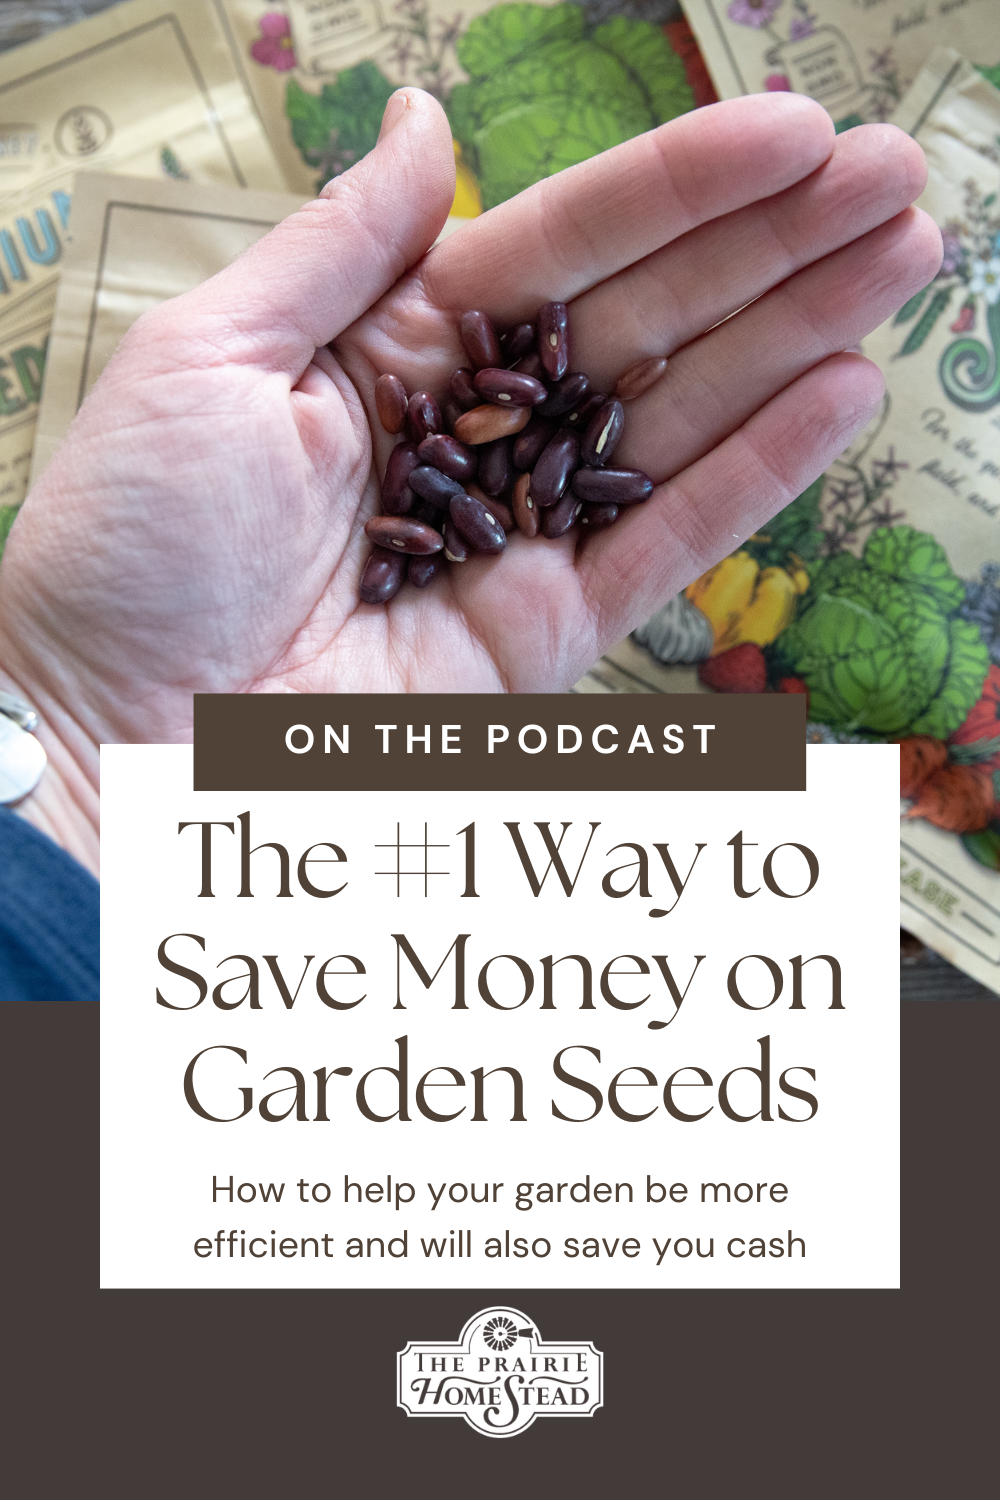 The #1 Way to Save Money on Garden Seeds